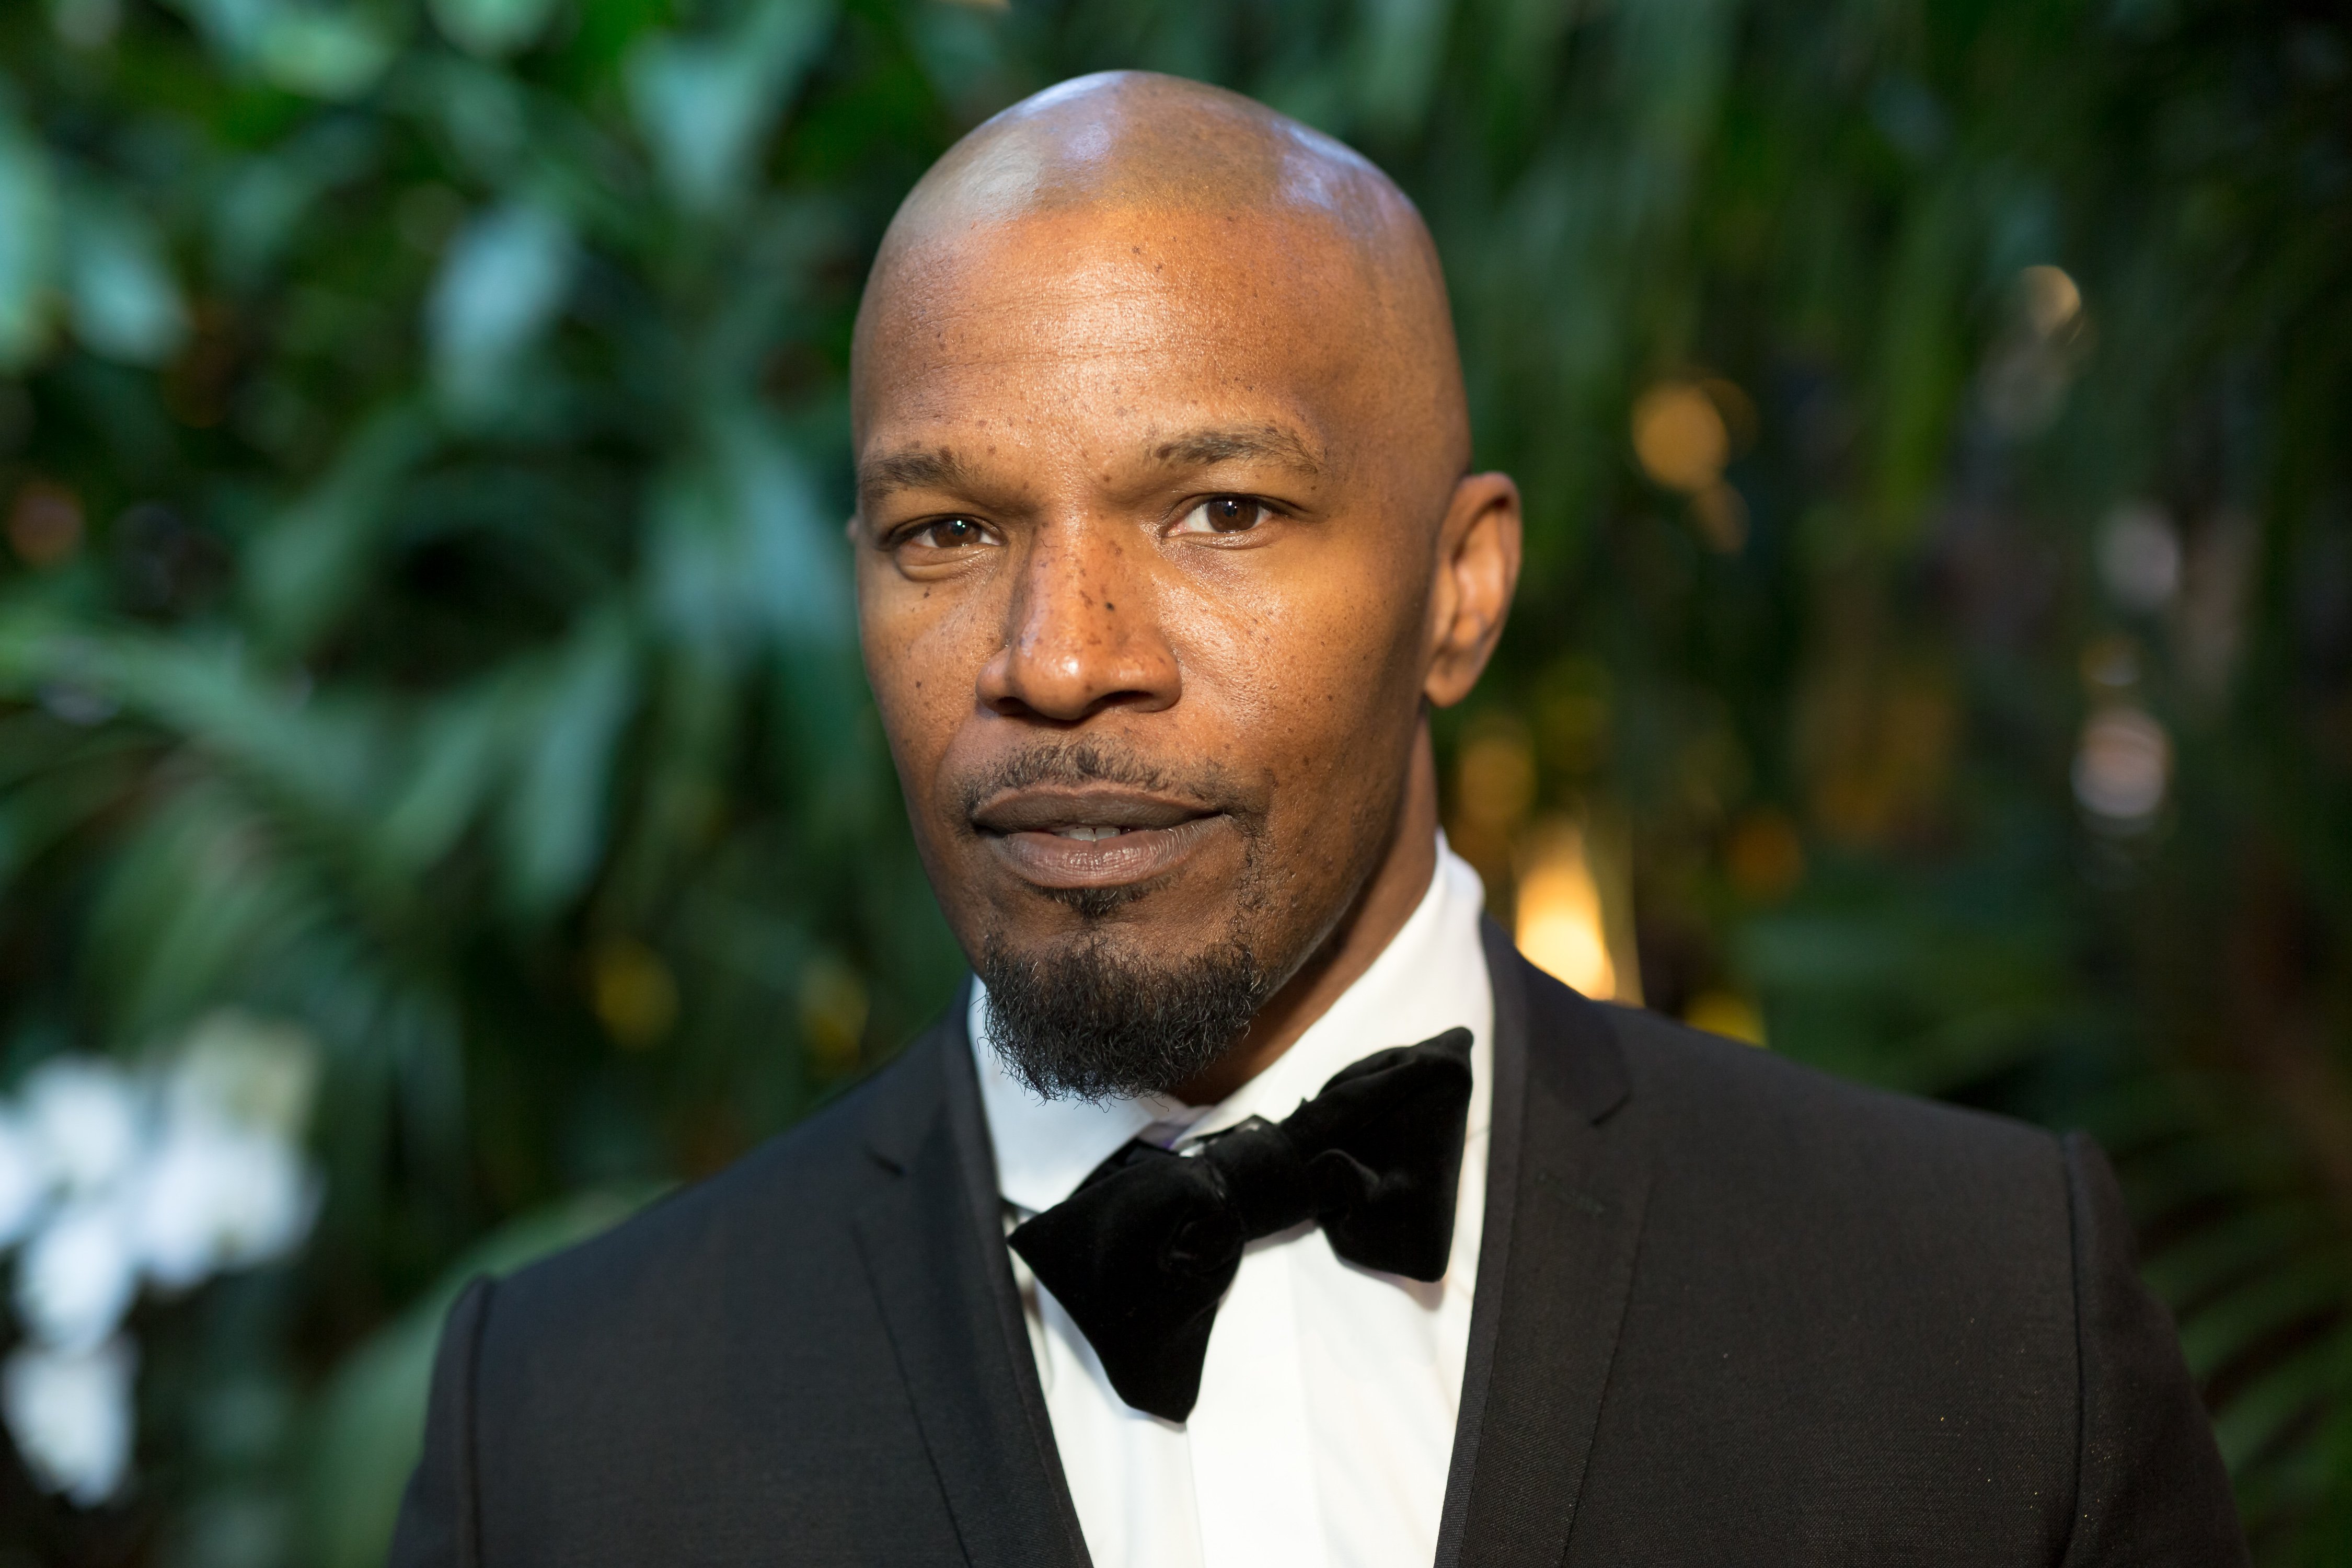 Jamie Foxx pictured at the Mercedez-Benz USA's Official Awards Viewing Party in Beverly Hills on March 4, 2018 in Los Angeles, California. | Source: Getty Images